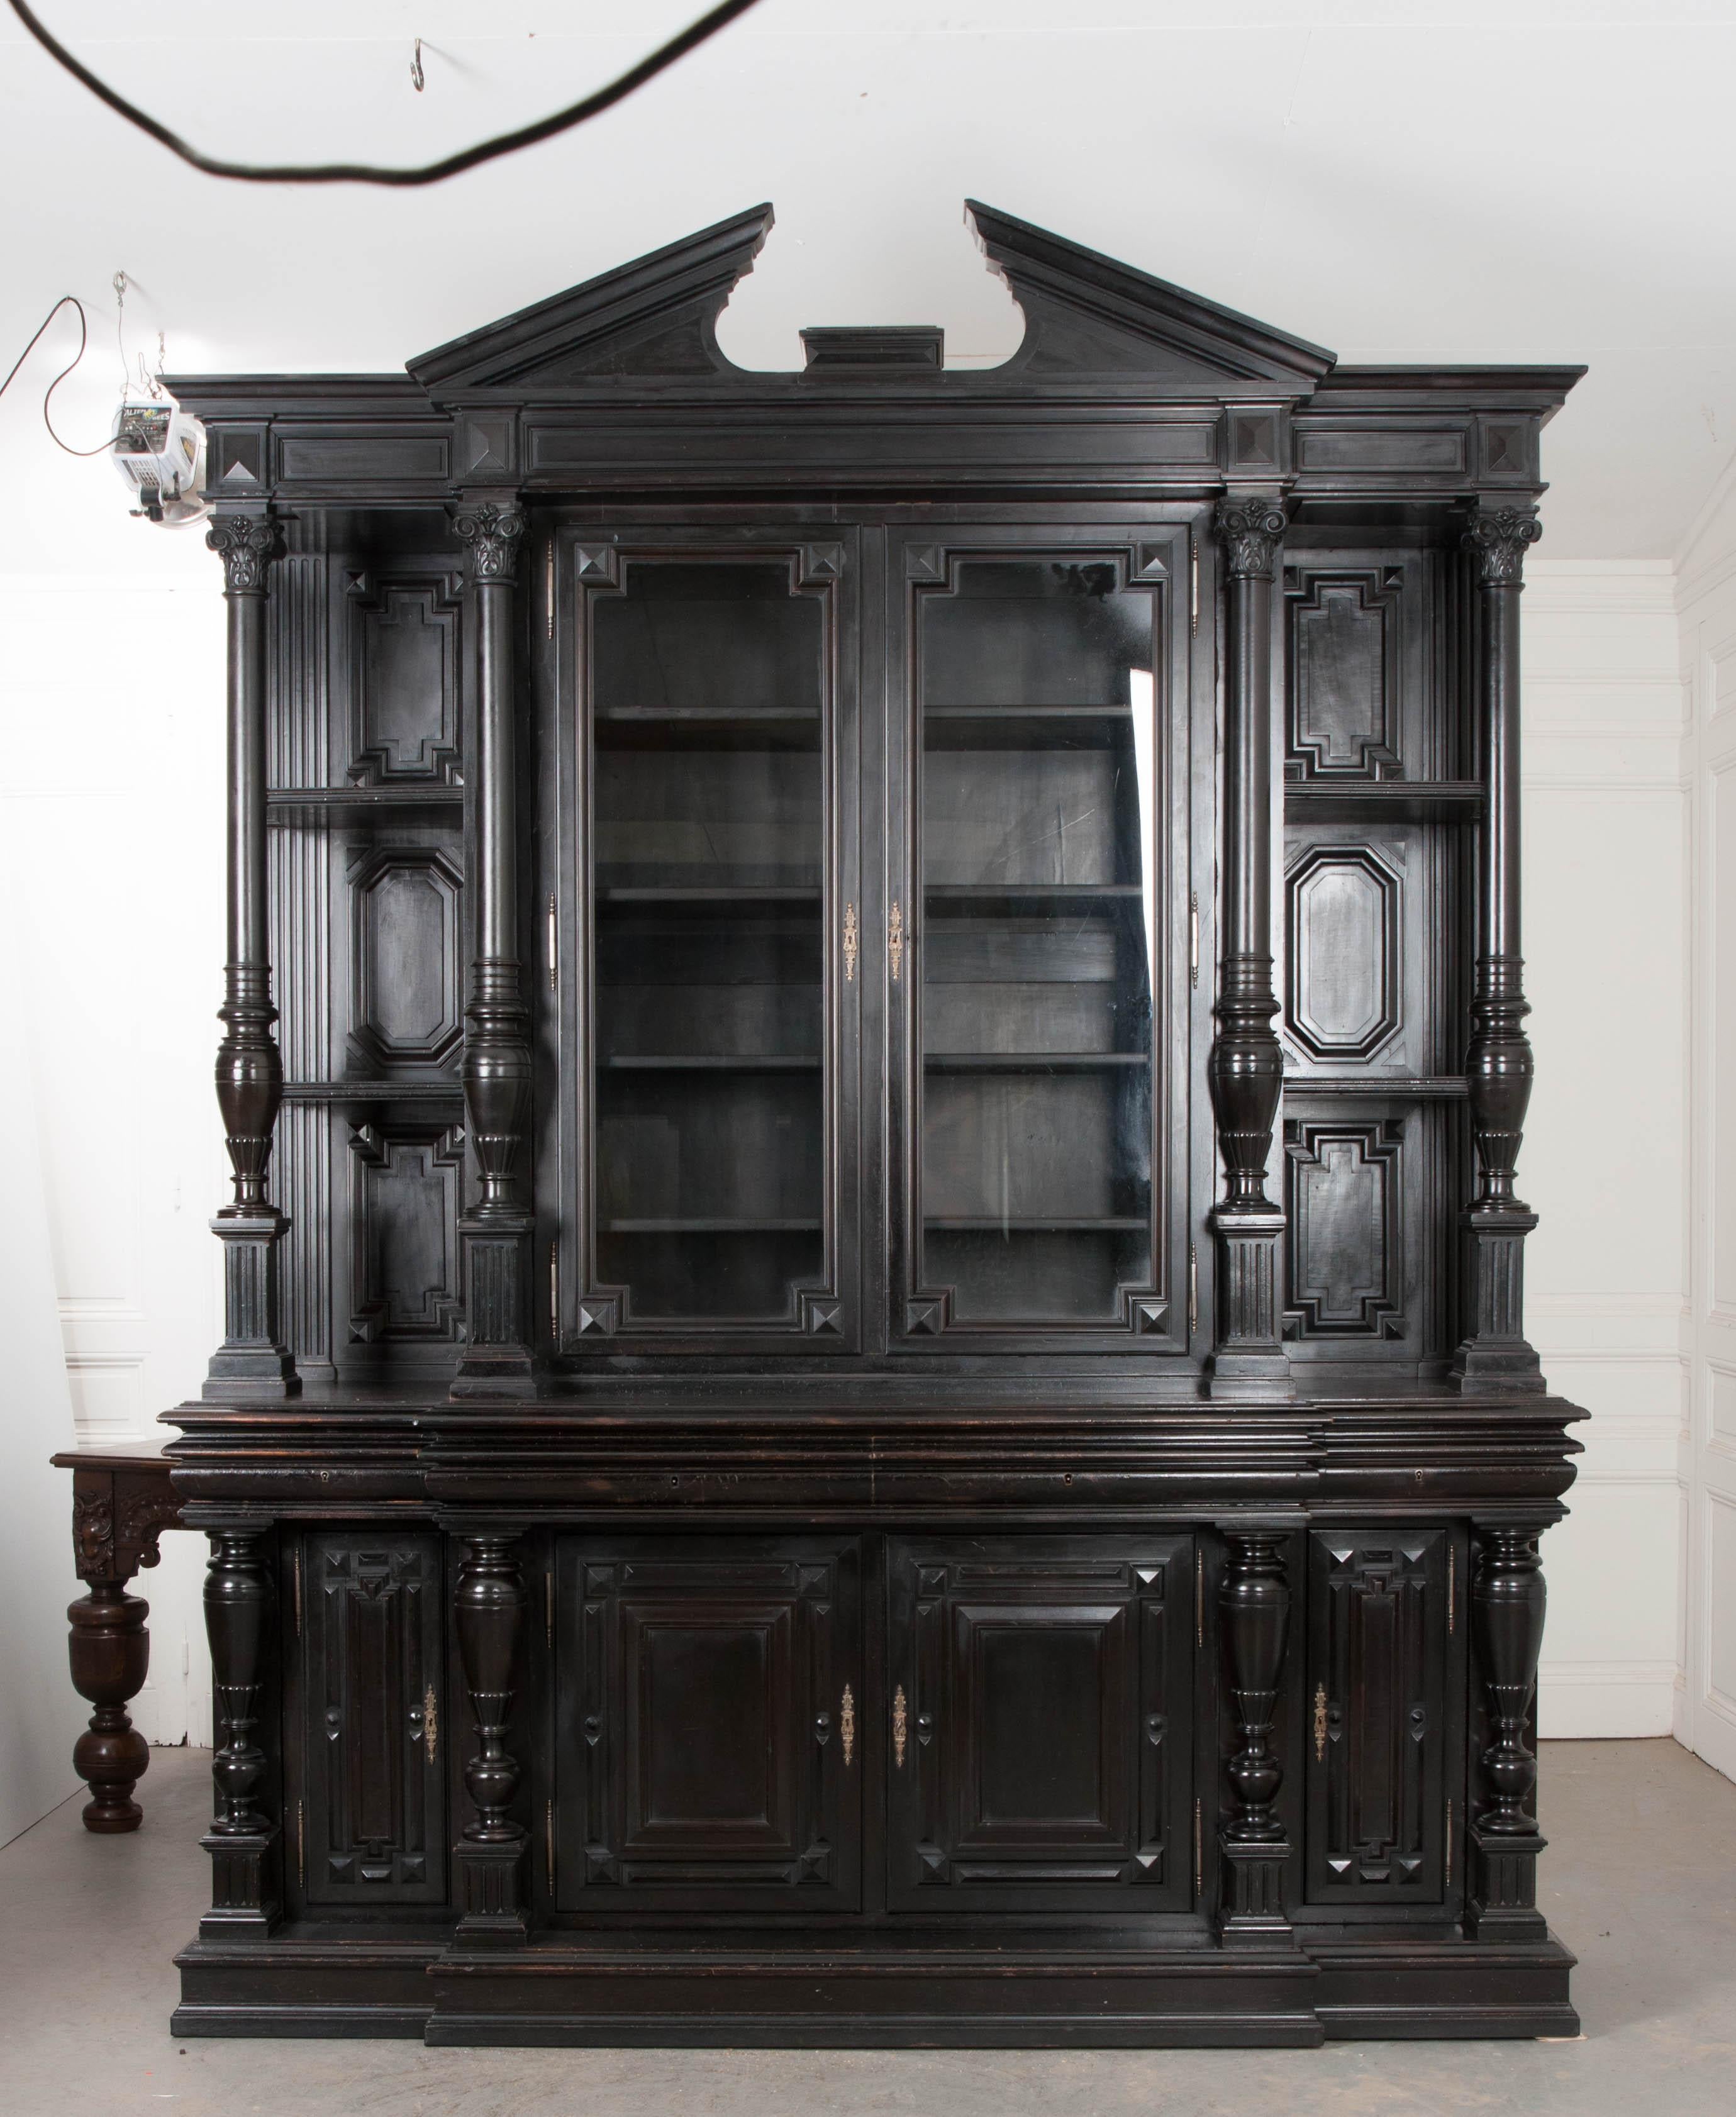 This rare, impressive, and eclectic carved Napoleon III ebonized breakfront-bibliothèque is from Paris, France, circa 1860s. It features an upper case with broken pediment and panel-carved and stepped frieze above a pair of glazed doors, through